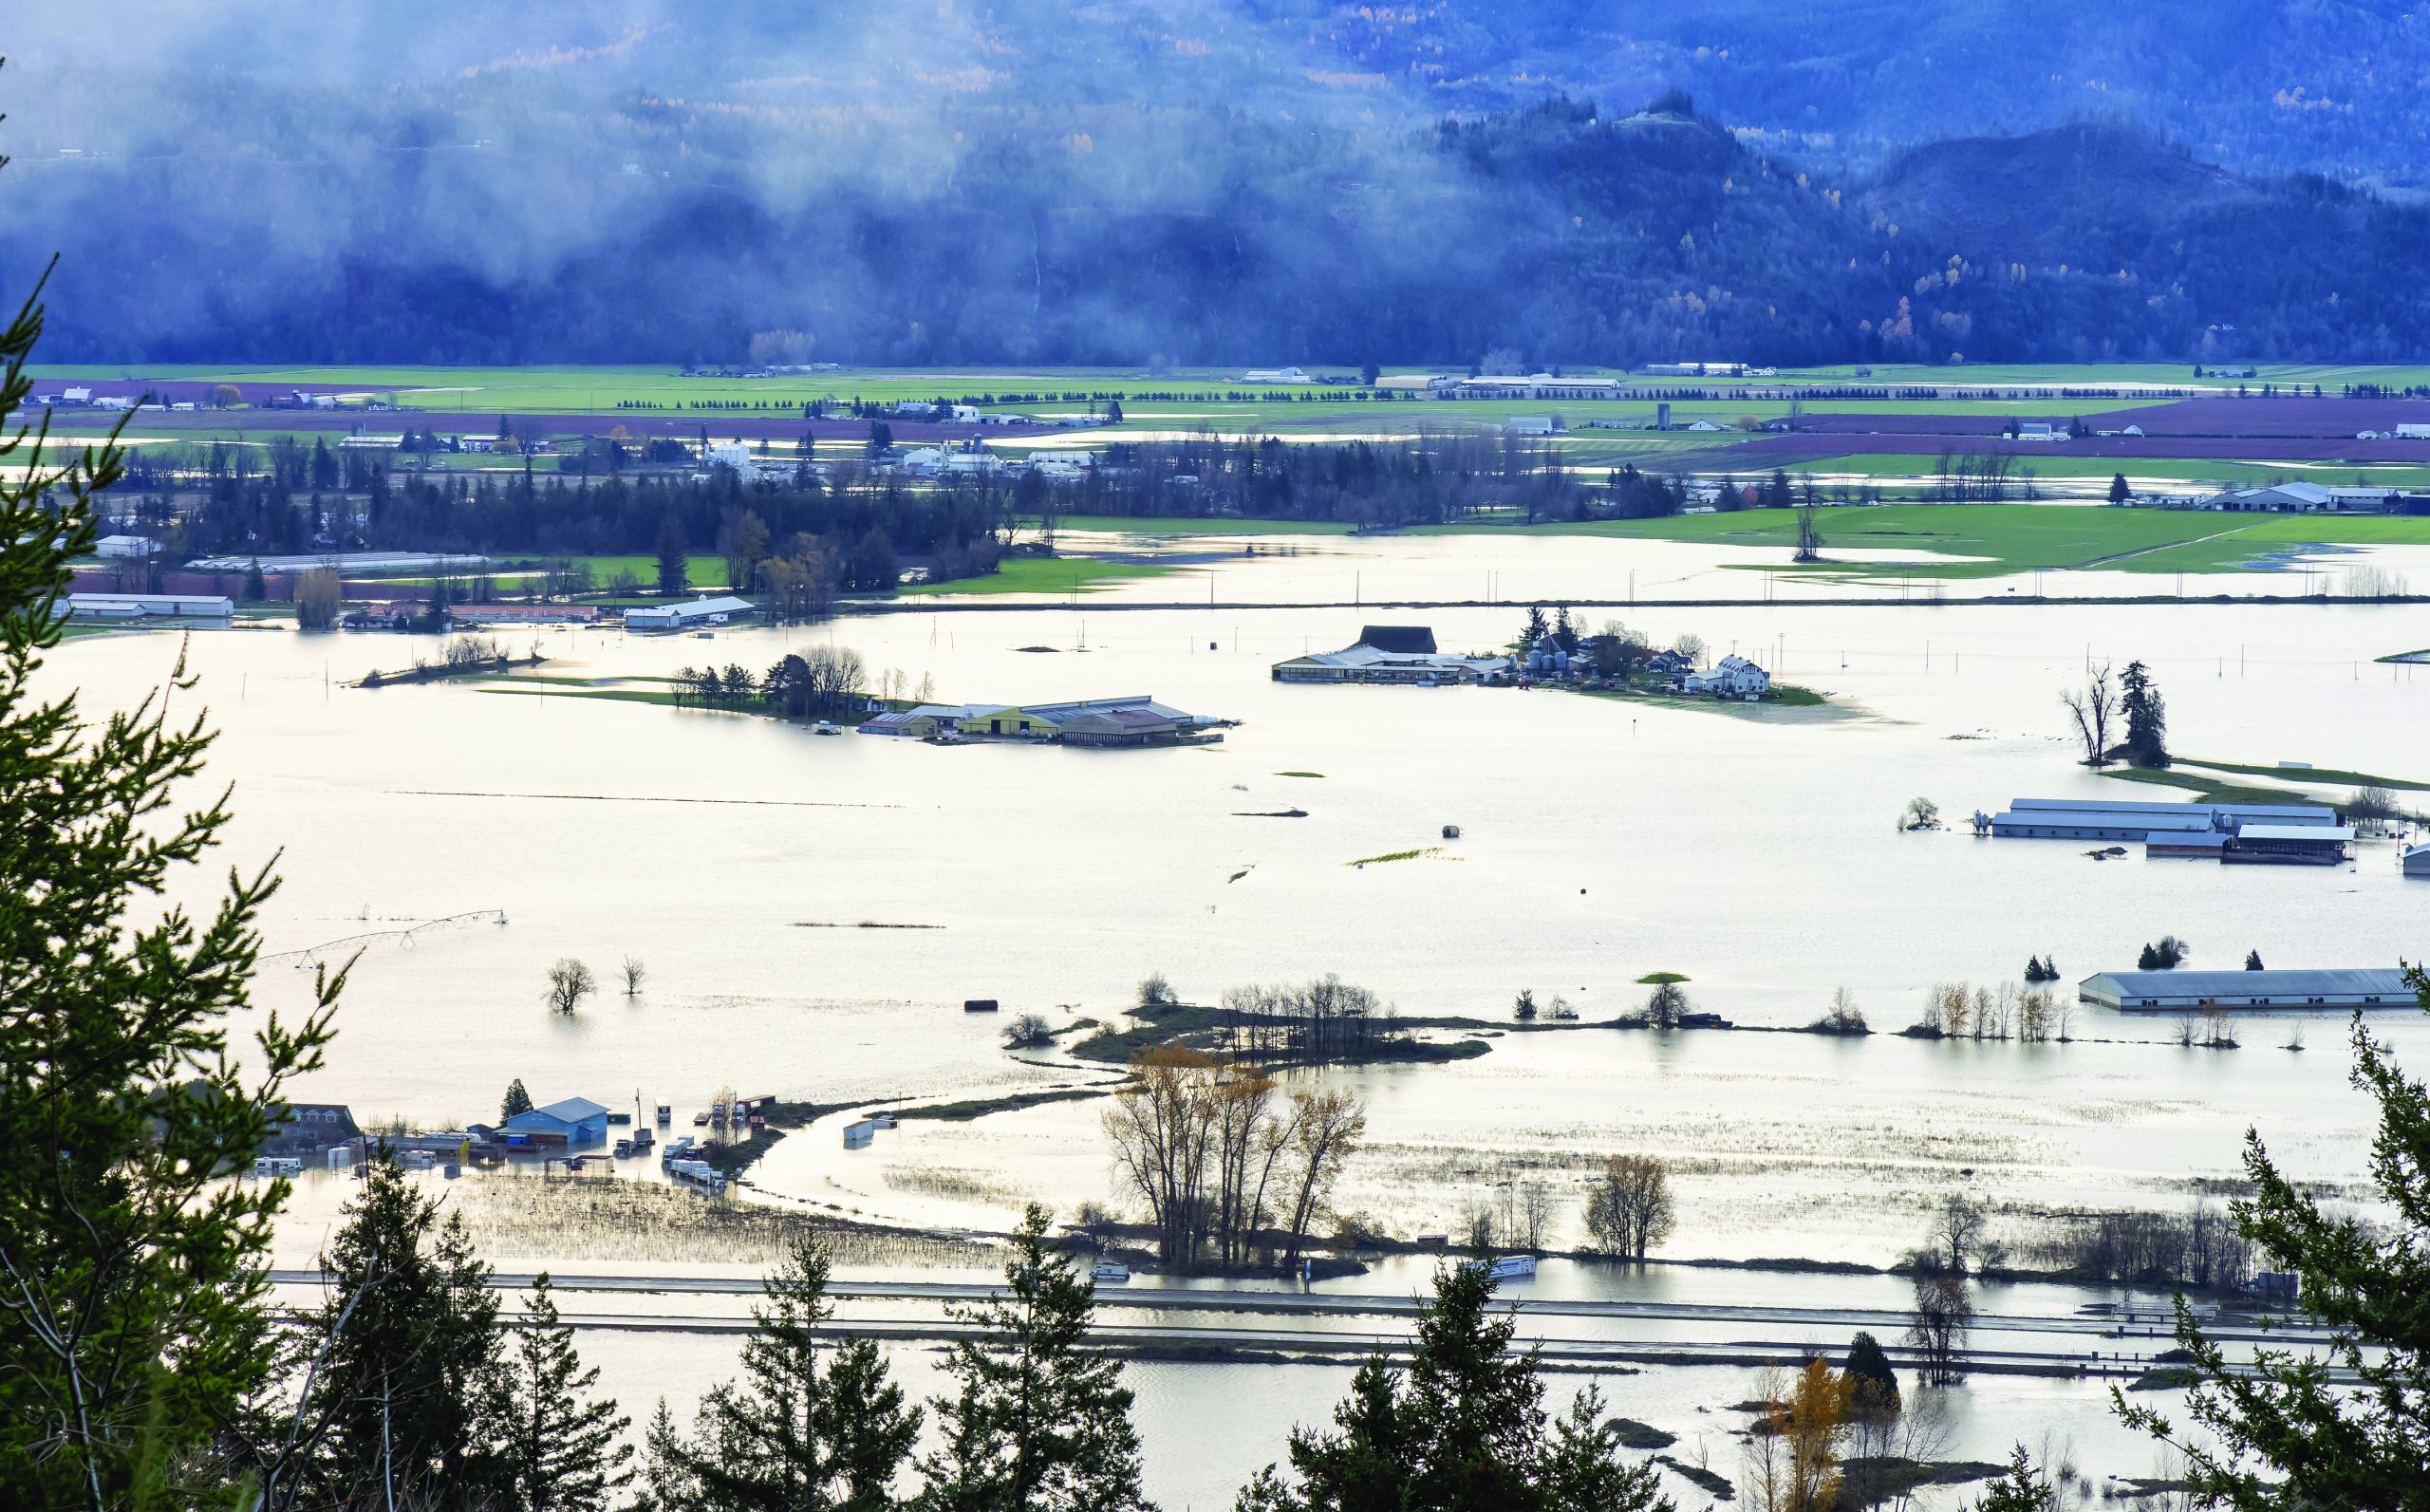 Devestating Flood and black smoke from fire in the city and farmland after storm.